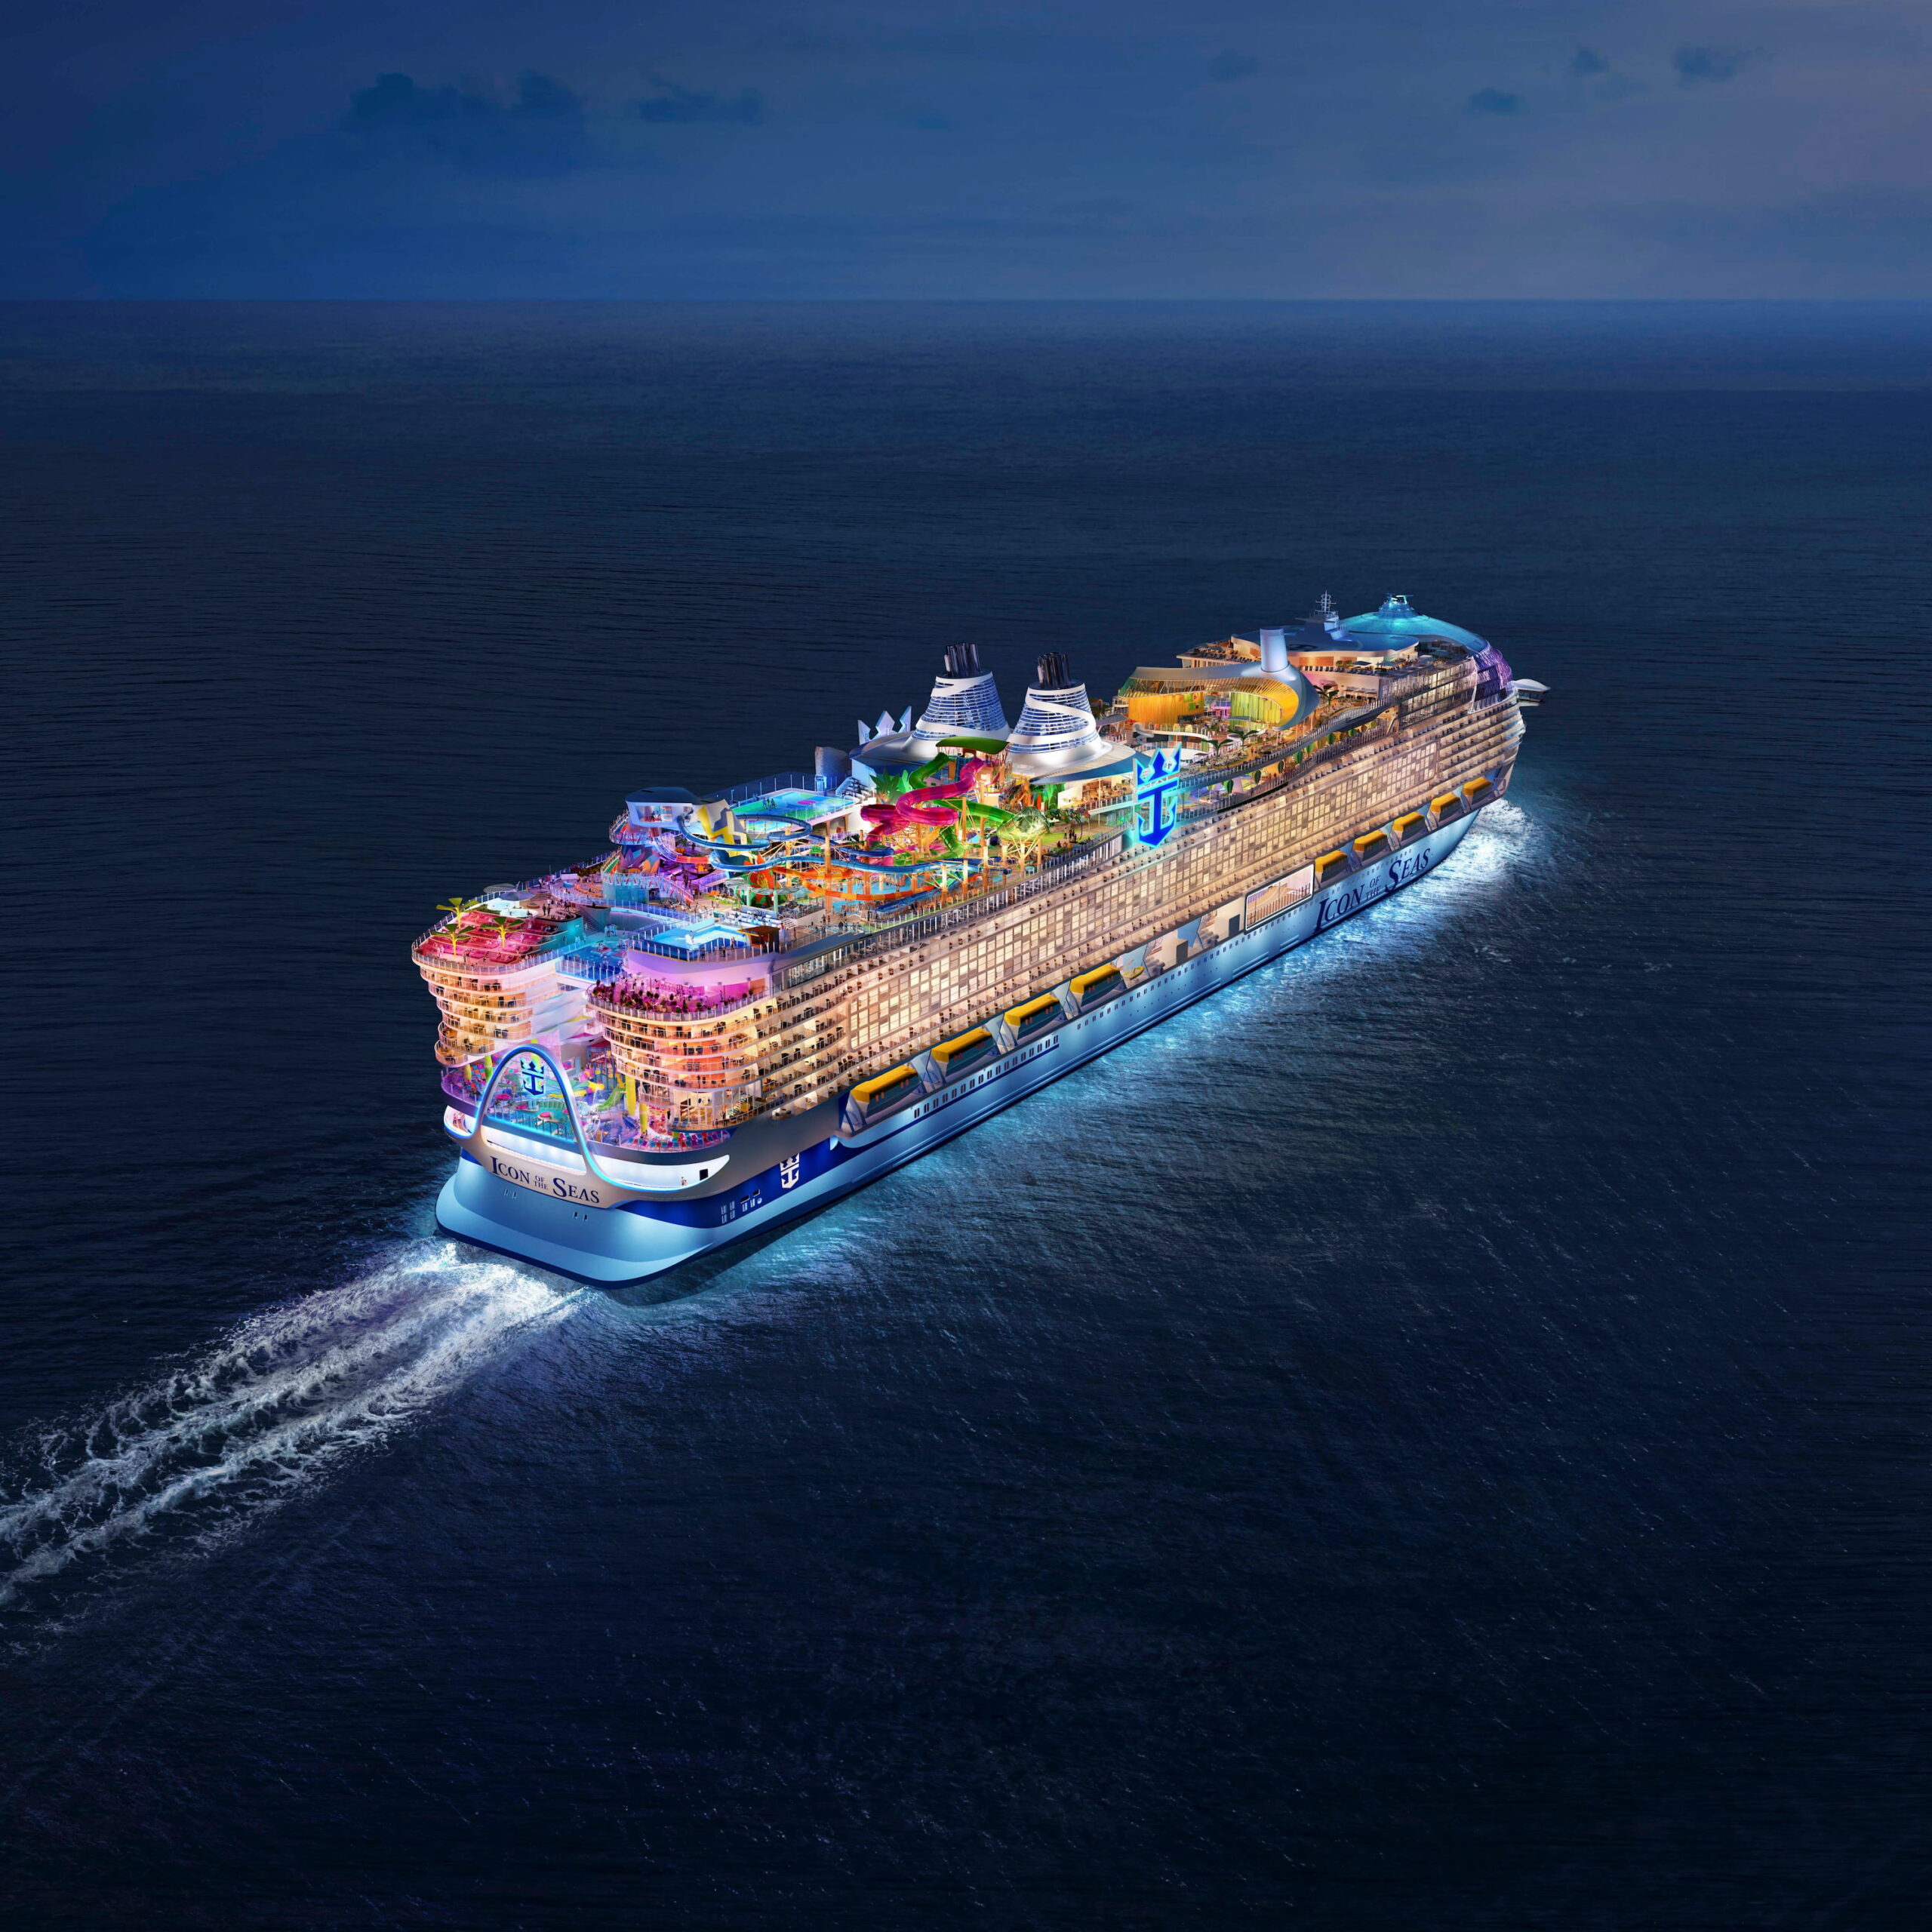 Check Out the World’s Largest Cruise Ship, Royal Caribbean’s Icon of the Seas